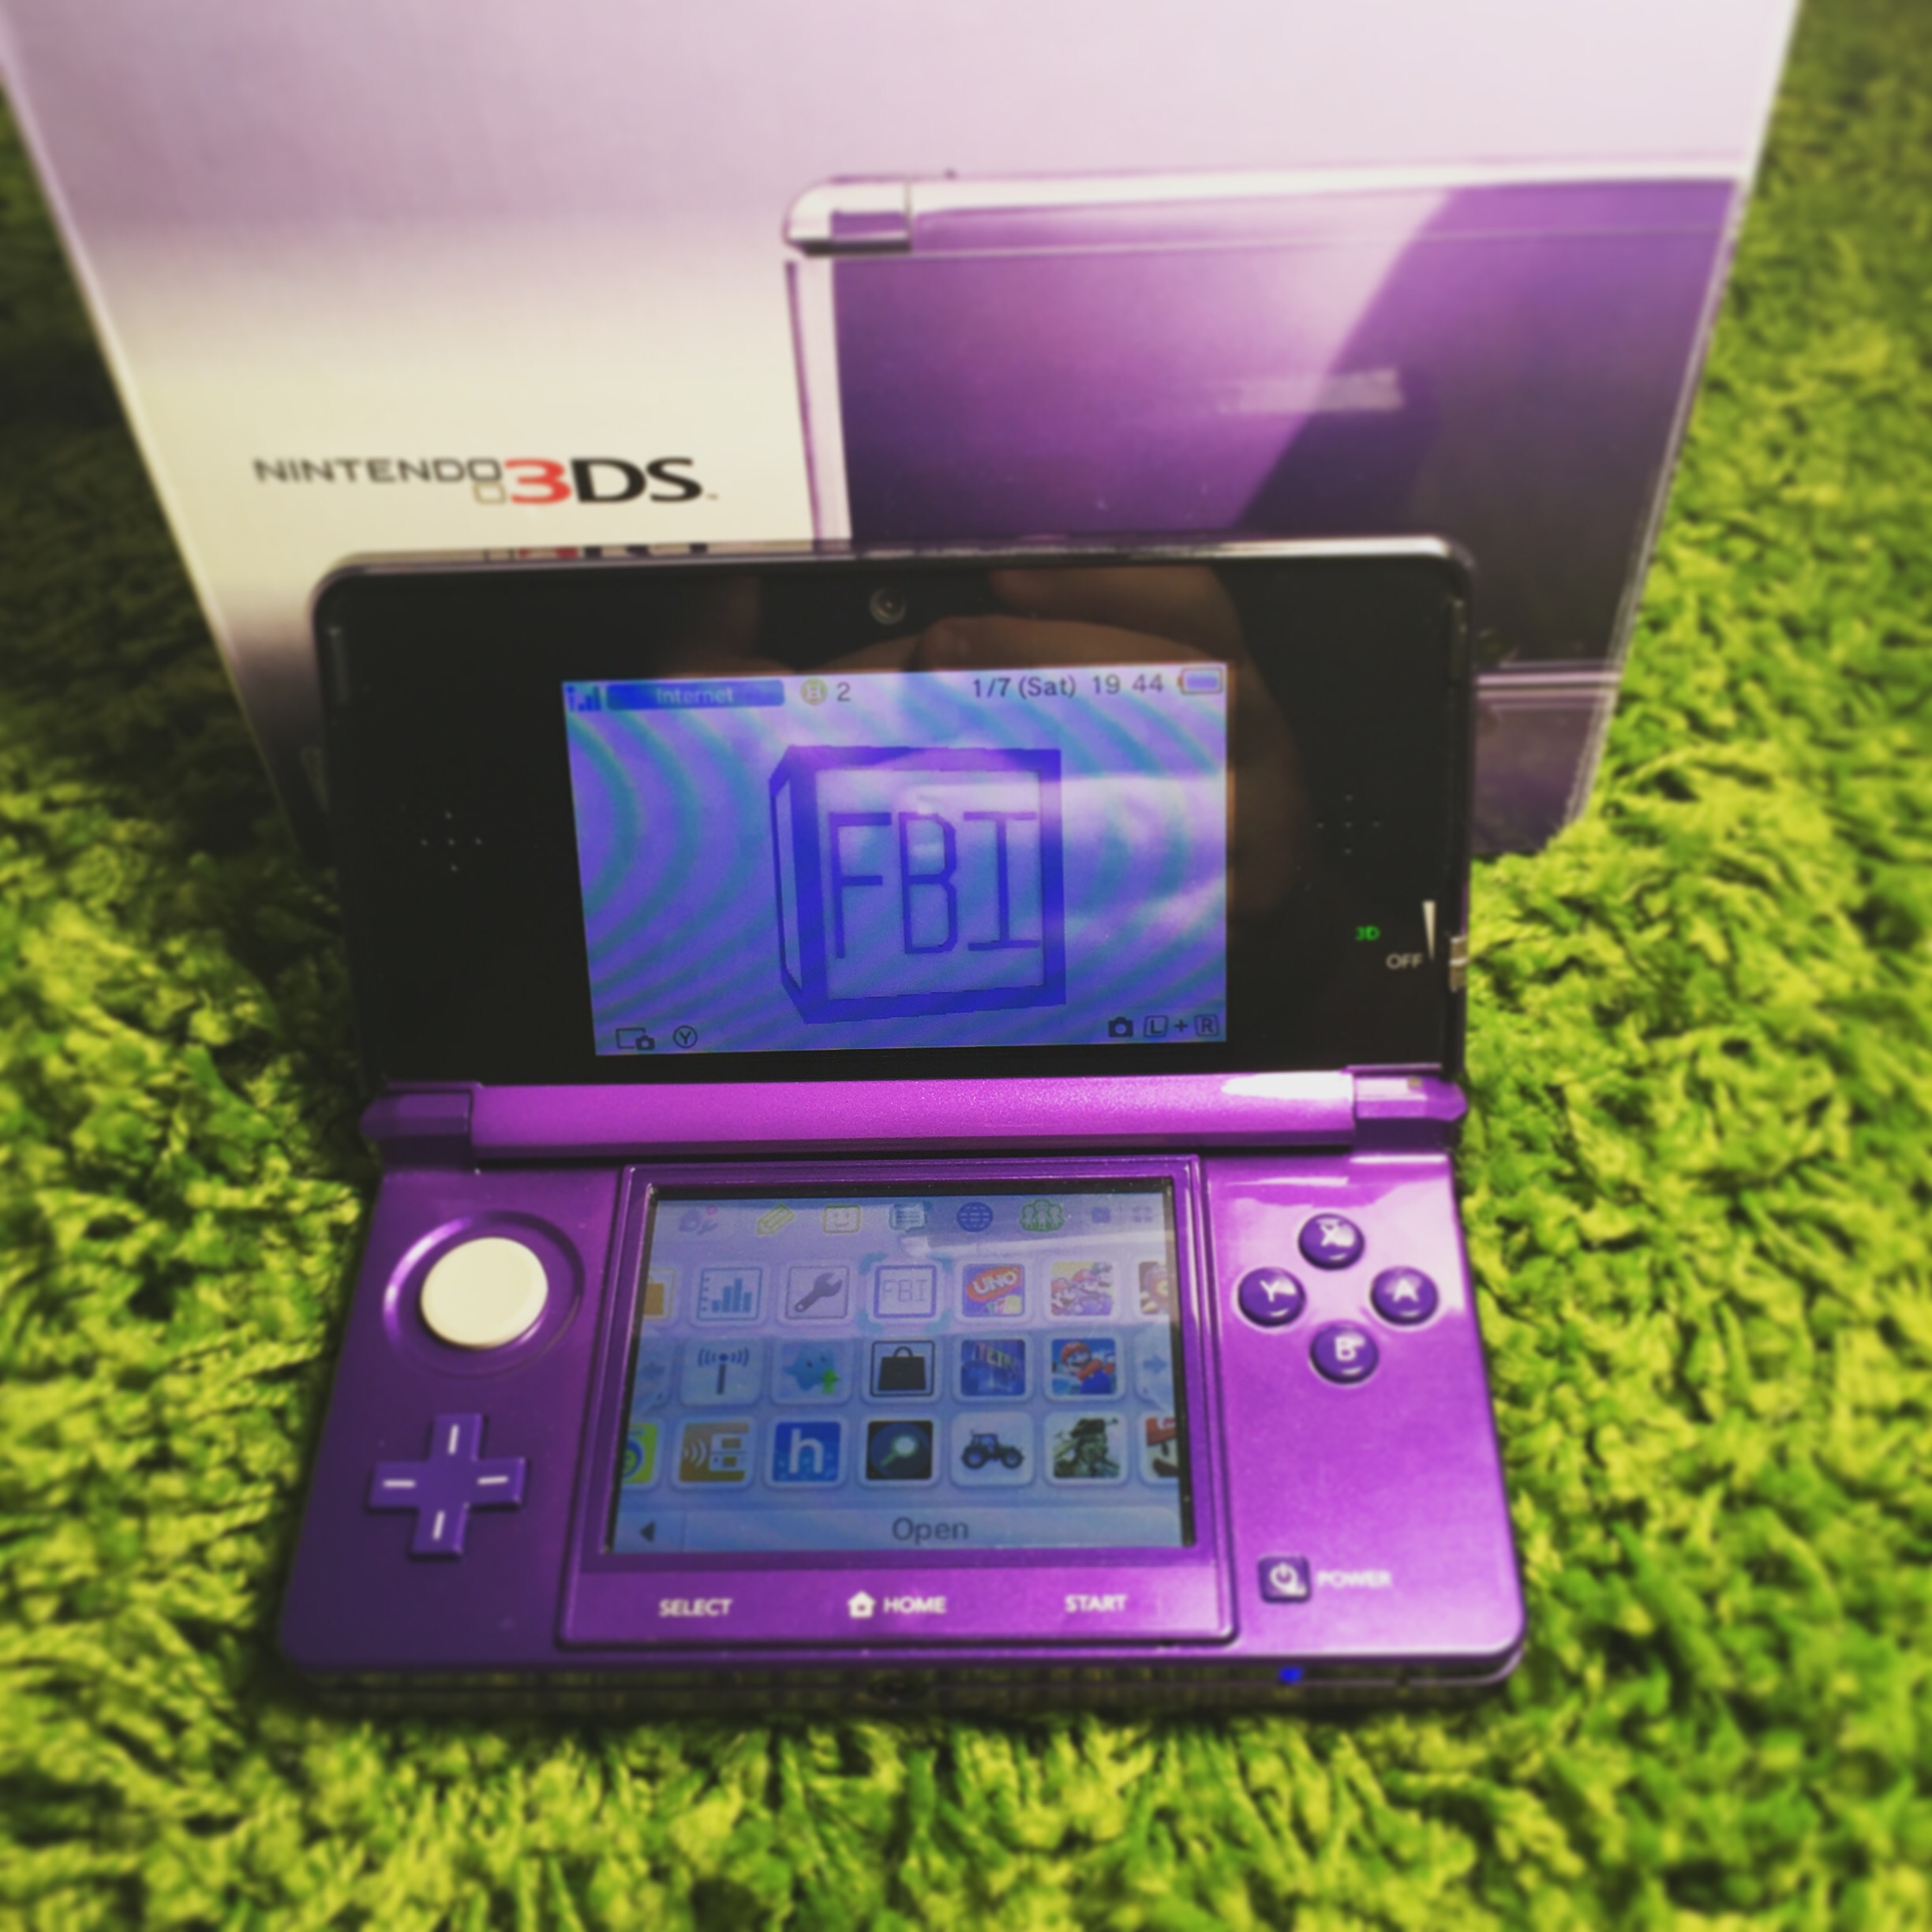 Old 3ds New To Me Evolvingconsole